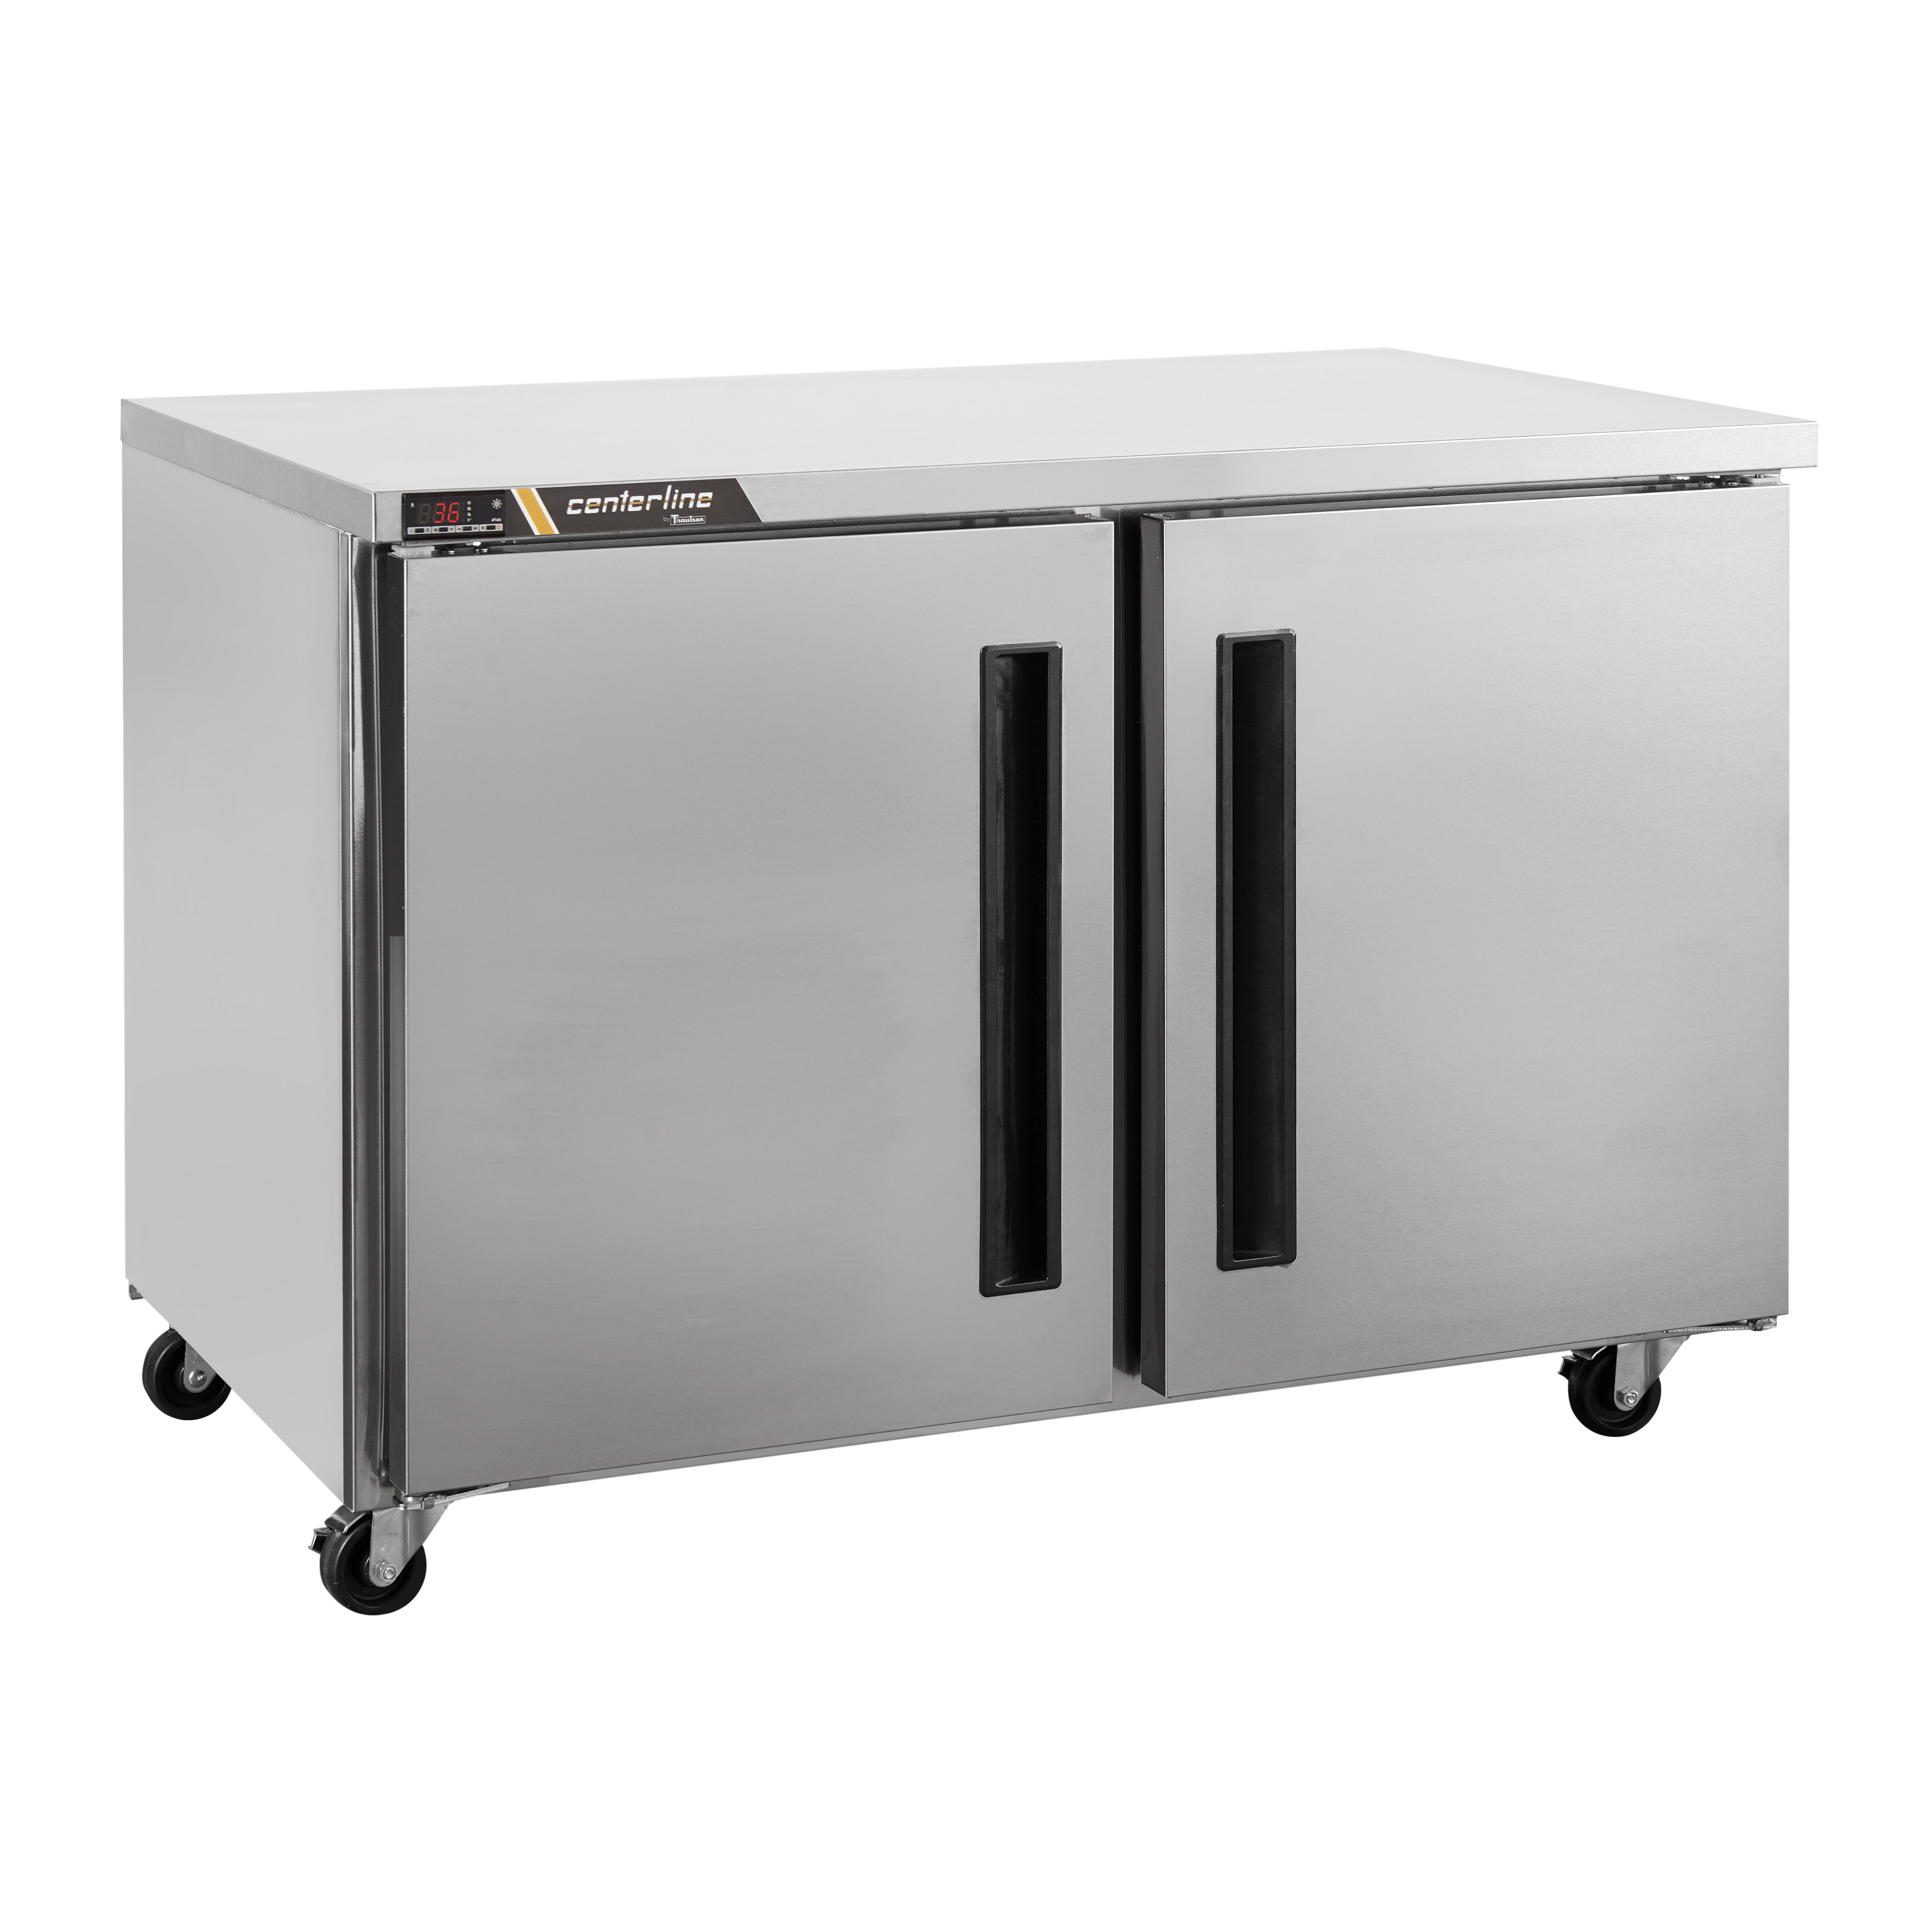 Centerline by Traulsen CLUC-60R-SD-RR 60″ 2-Right Hinged Solid Door Undercounter Refrigerator